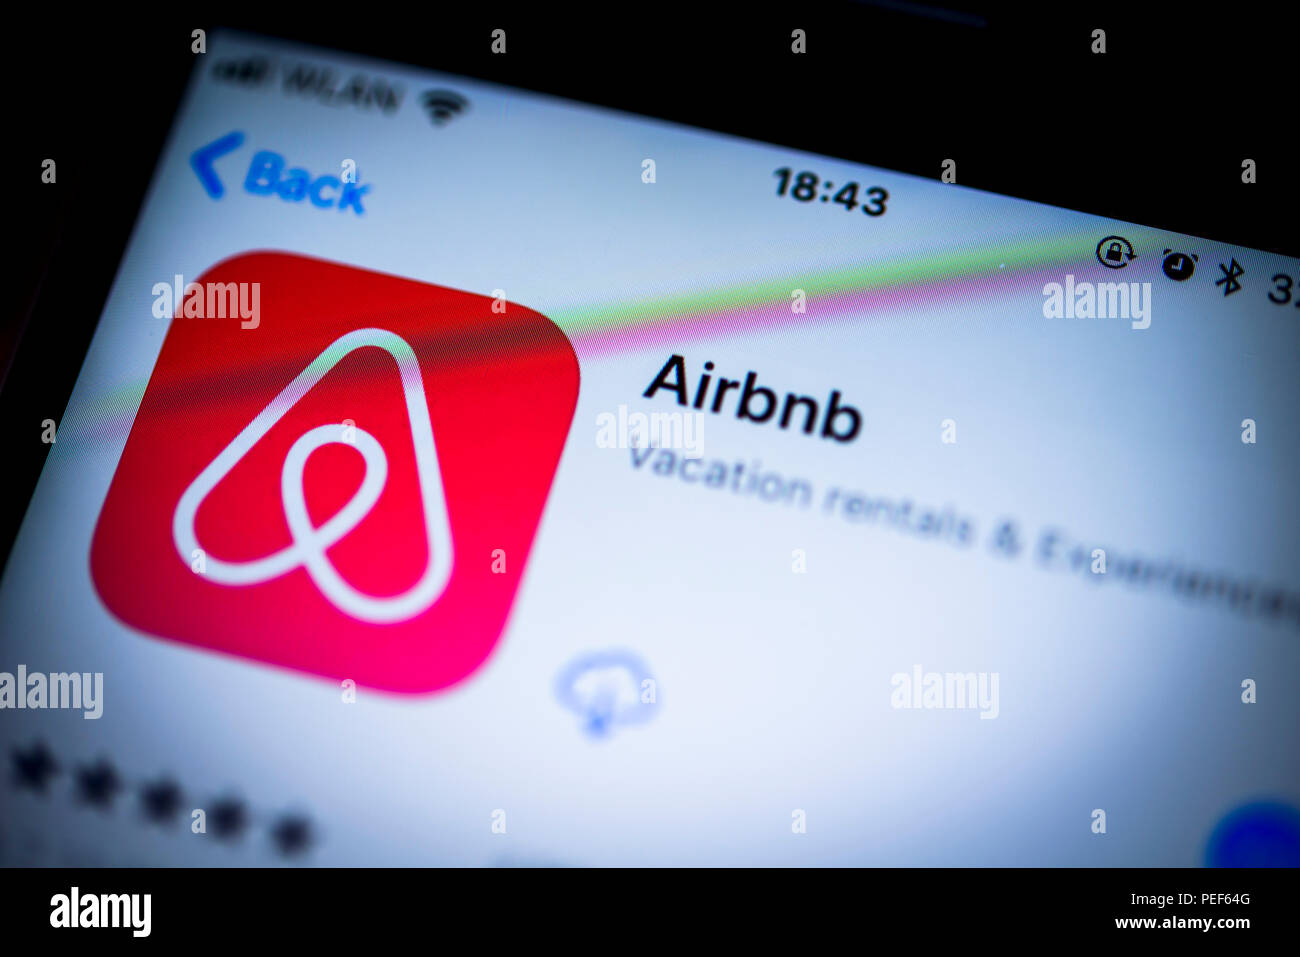 Airbnb, online accommodation and rentals app in the Apple App Store, app icon, display, iPhone, iOS, smartphone, close-up Stock Photo